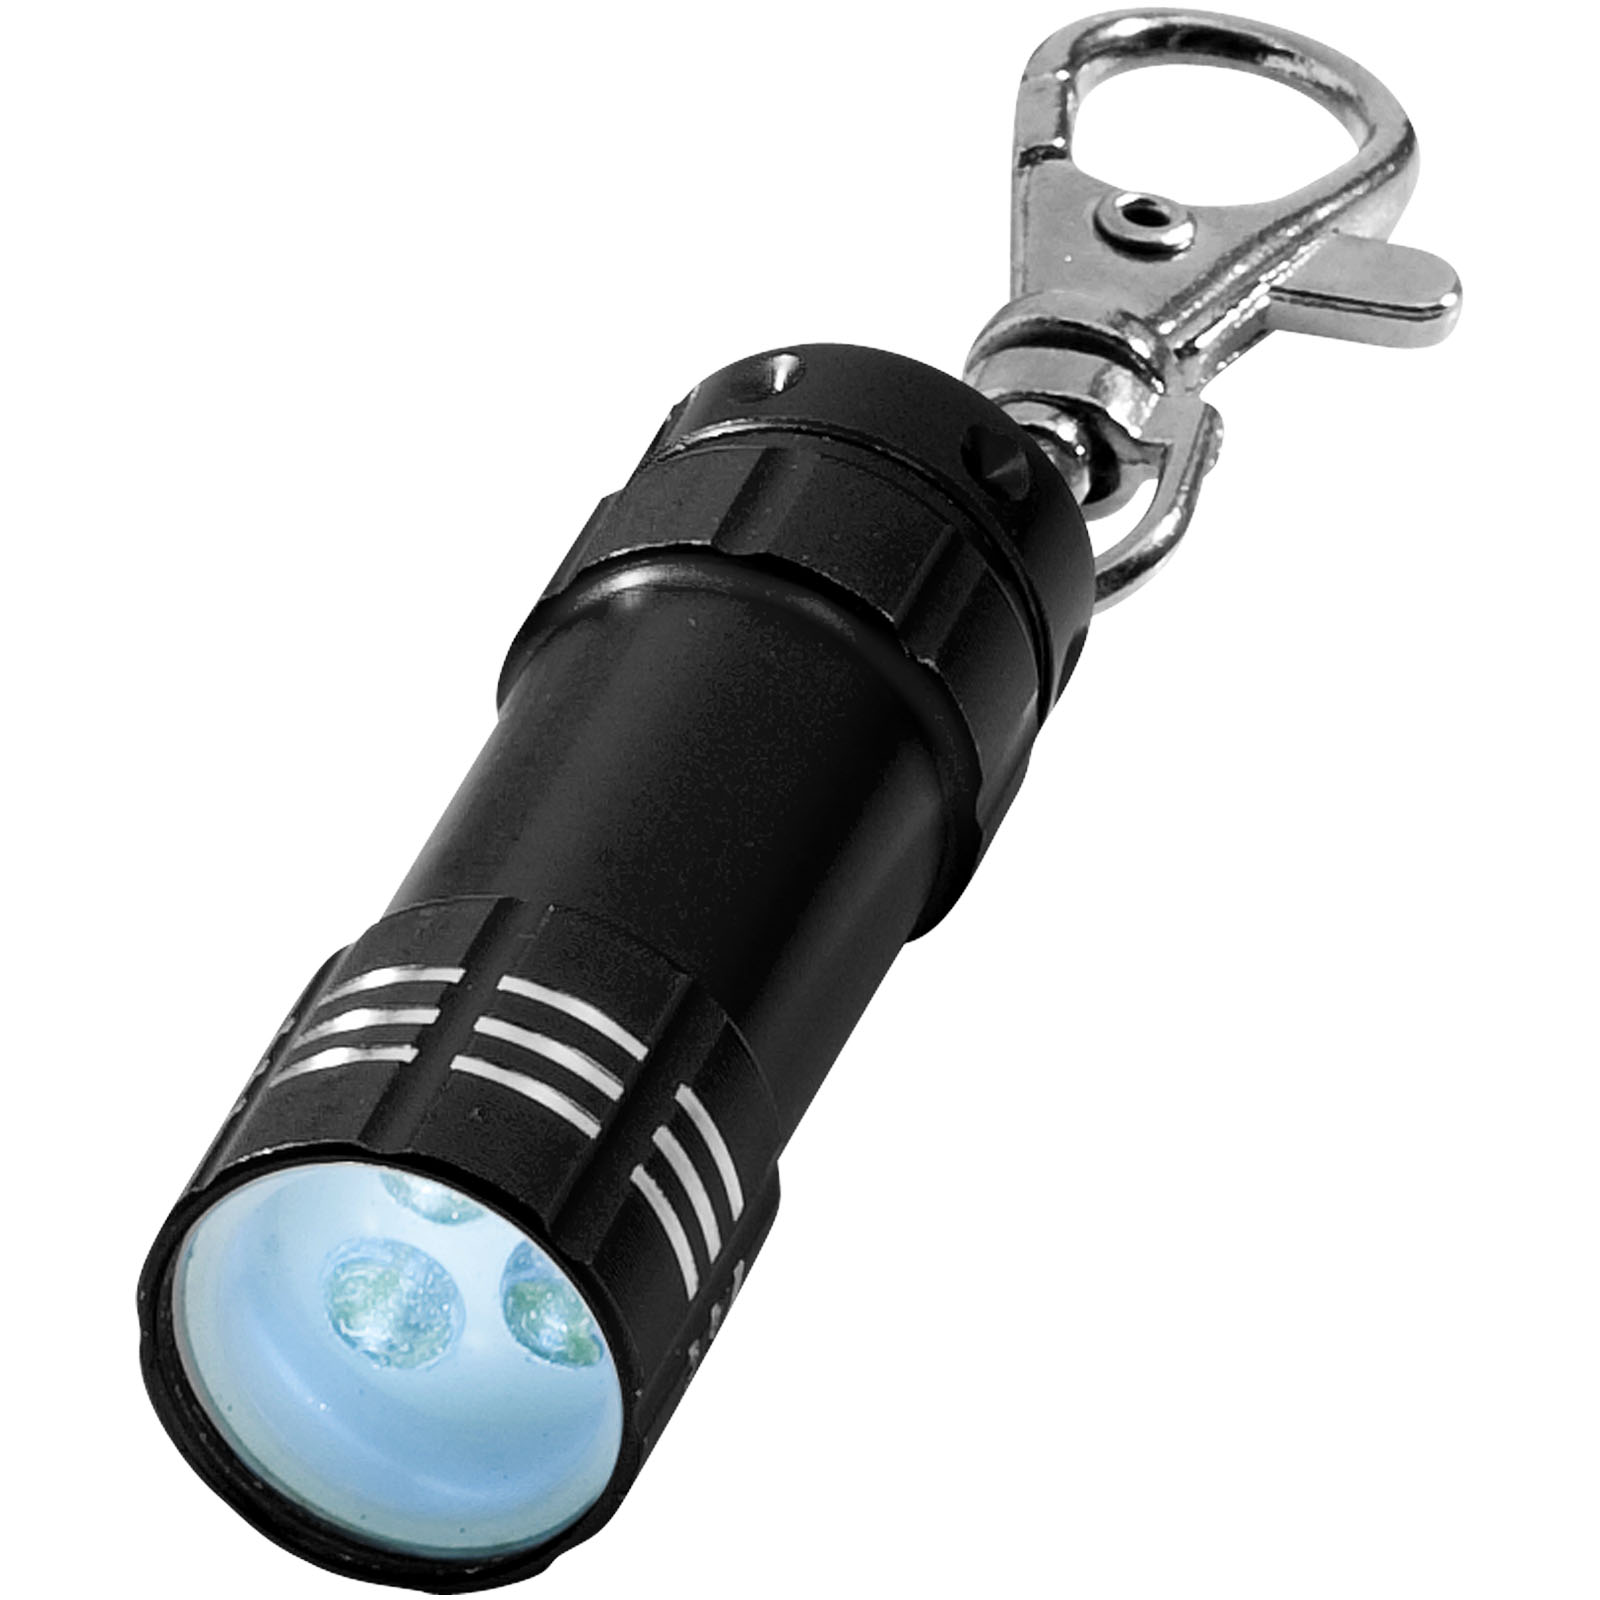 Tools & Car Accessories - Astro LED keychain light